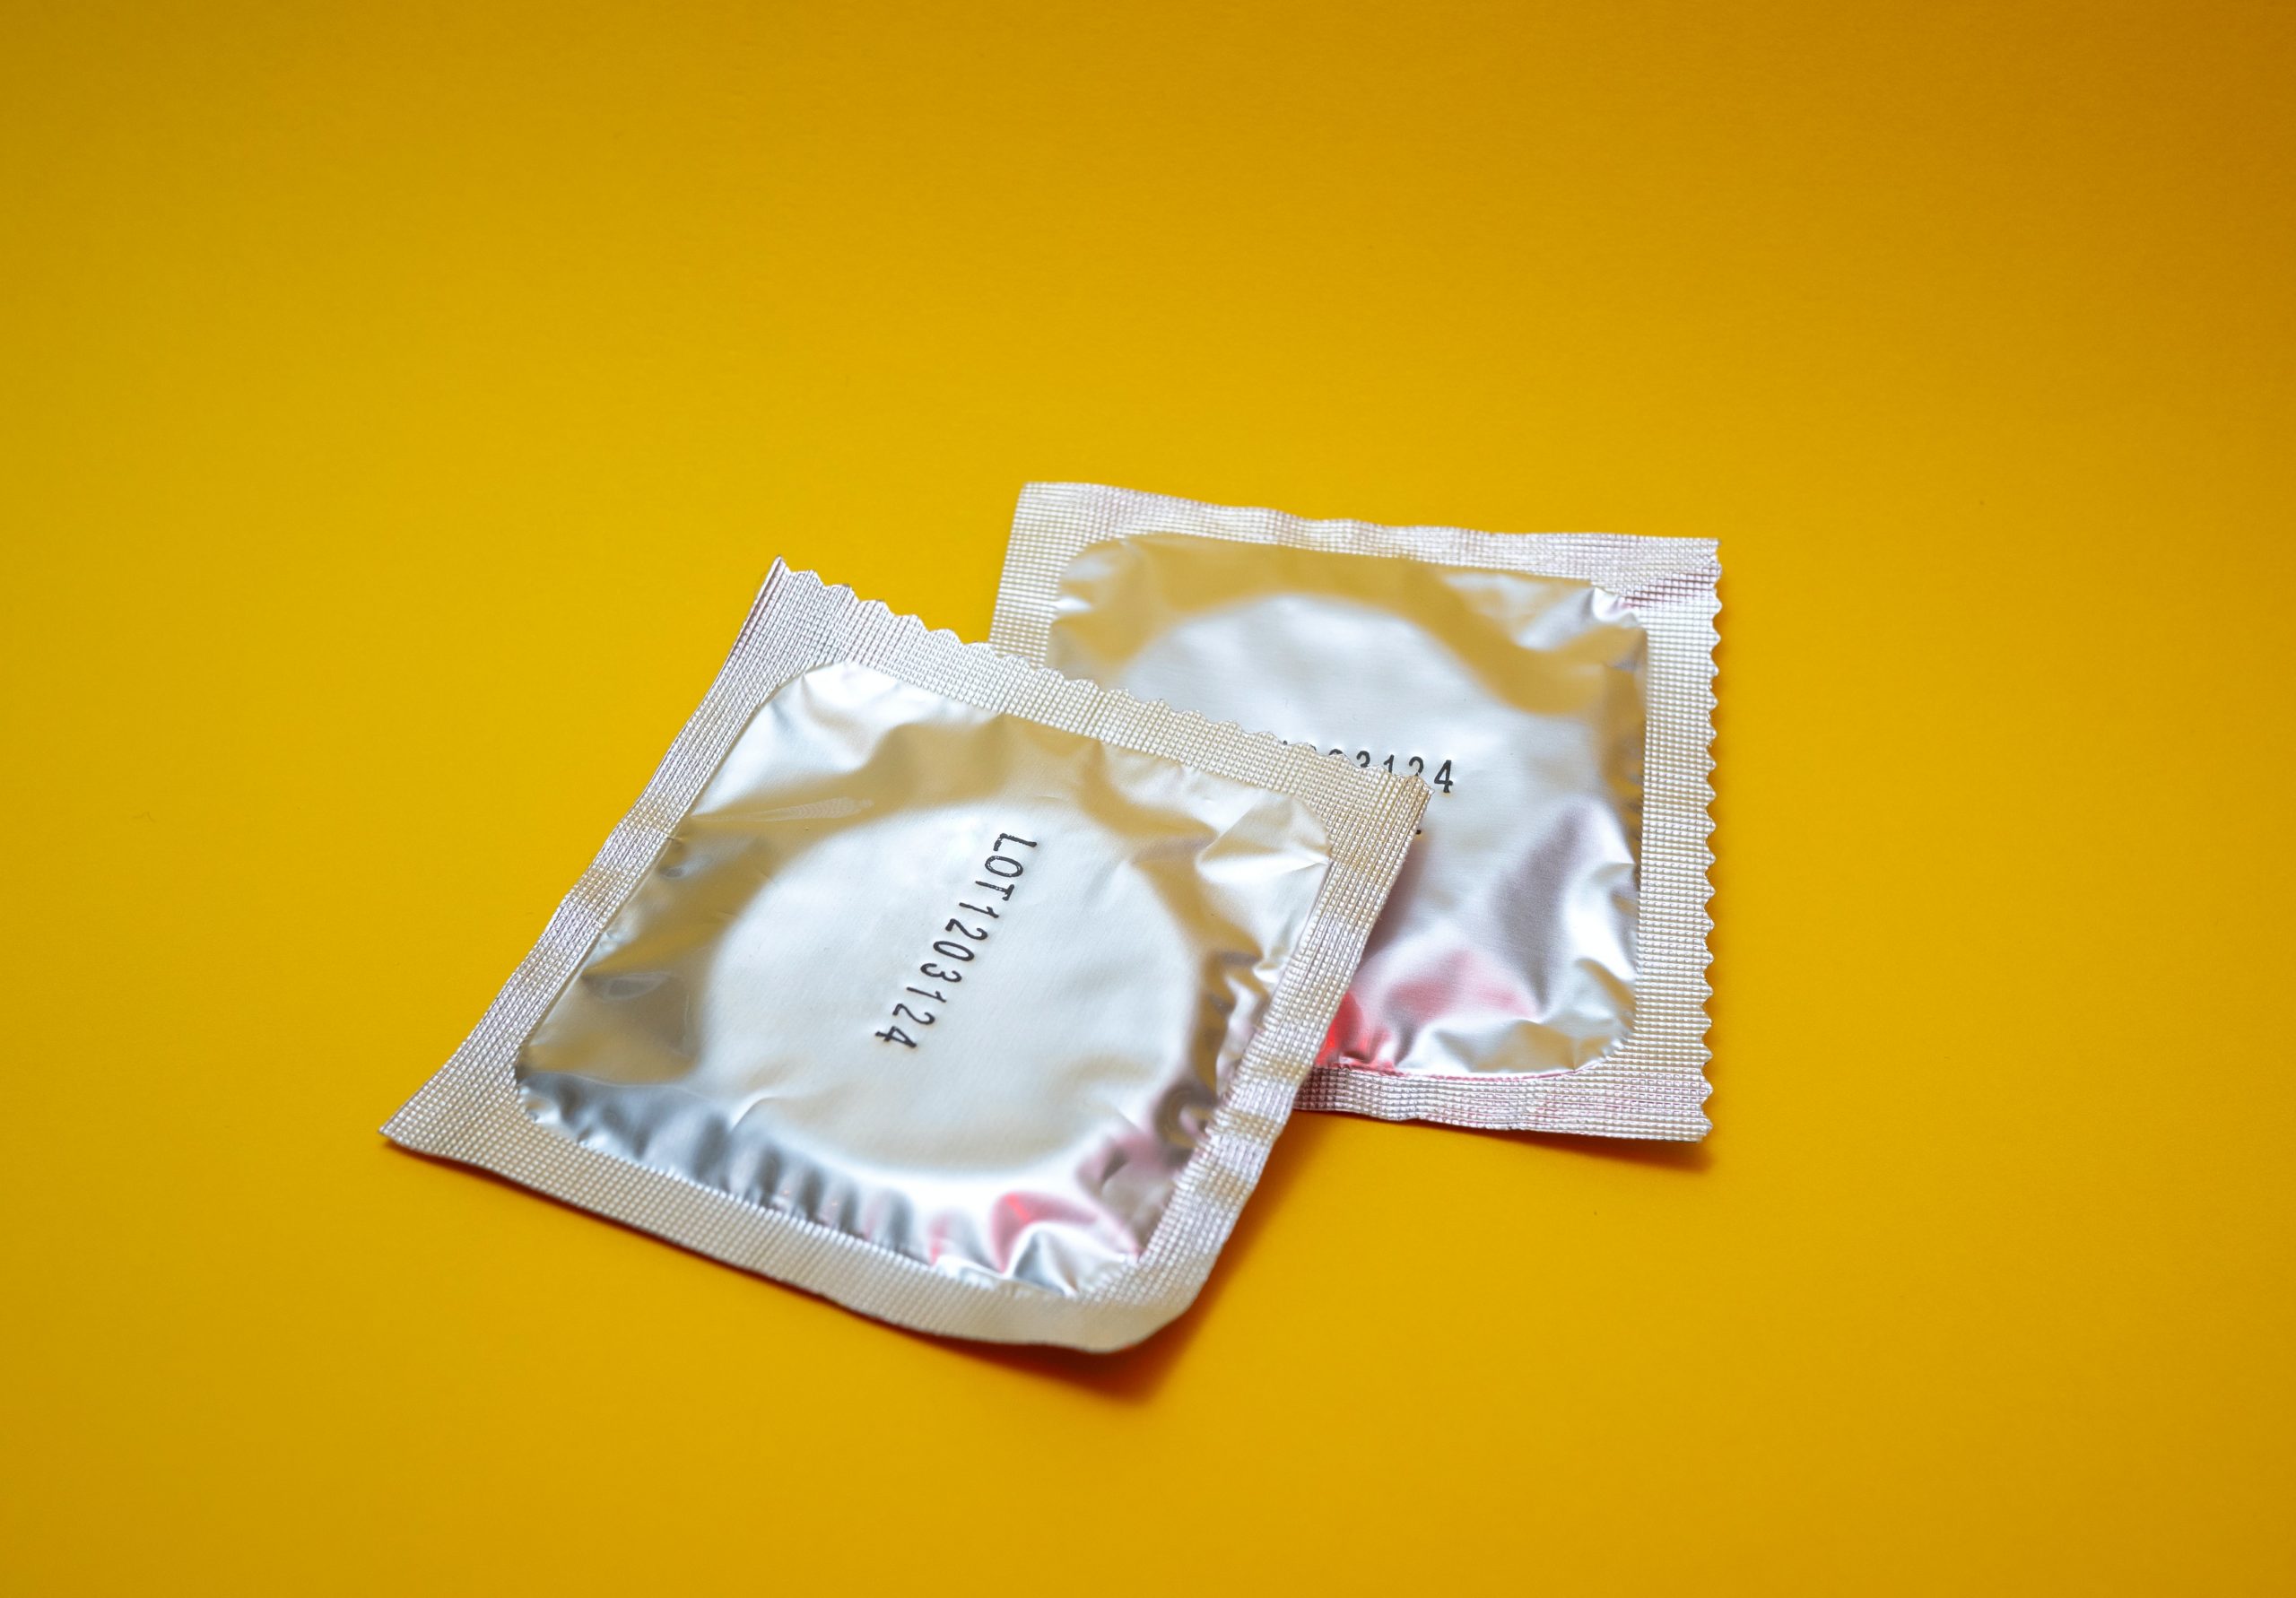 Should You Put a Condom on Sex Toys?